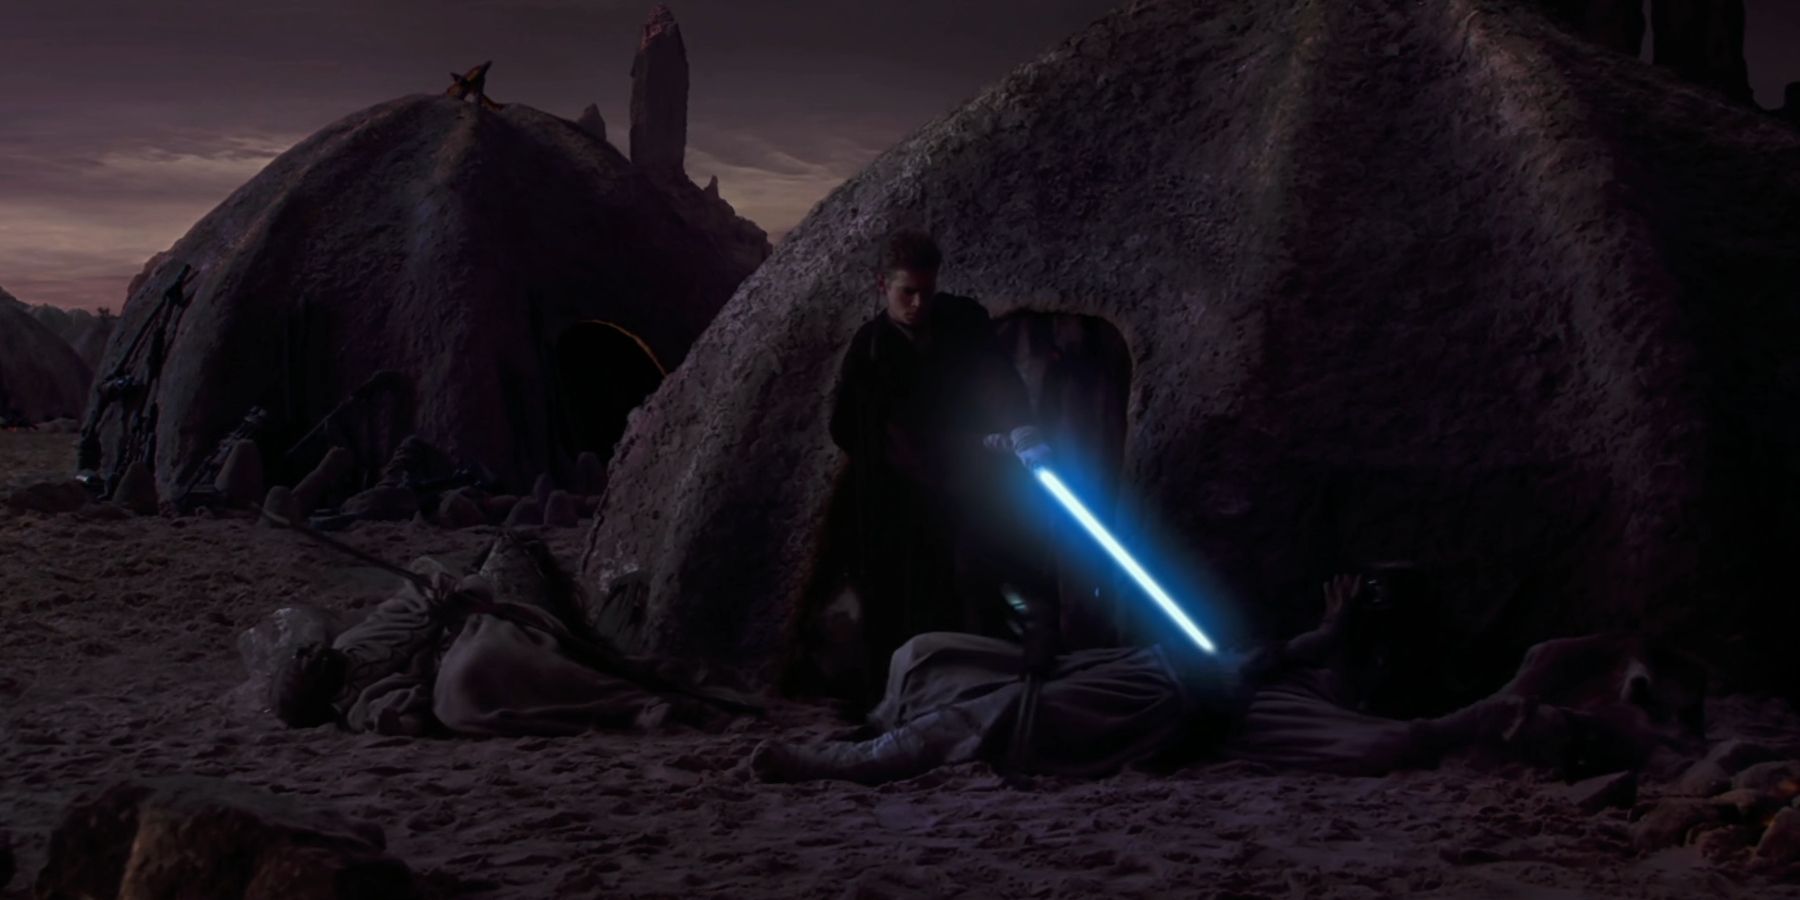 Anakin slaughtering Tusken Raiders in Star Wars Attack Of The Clones